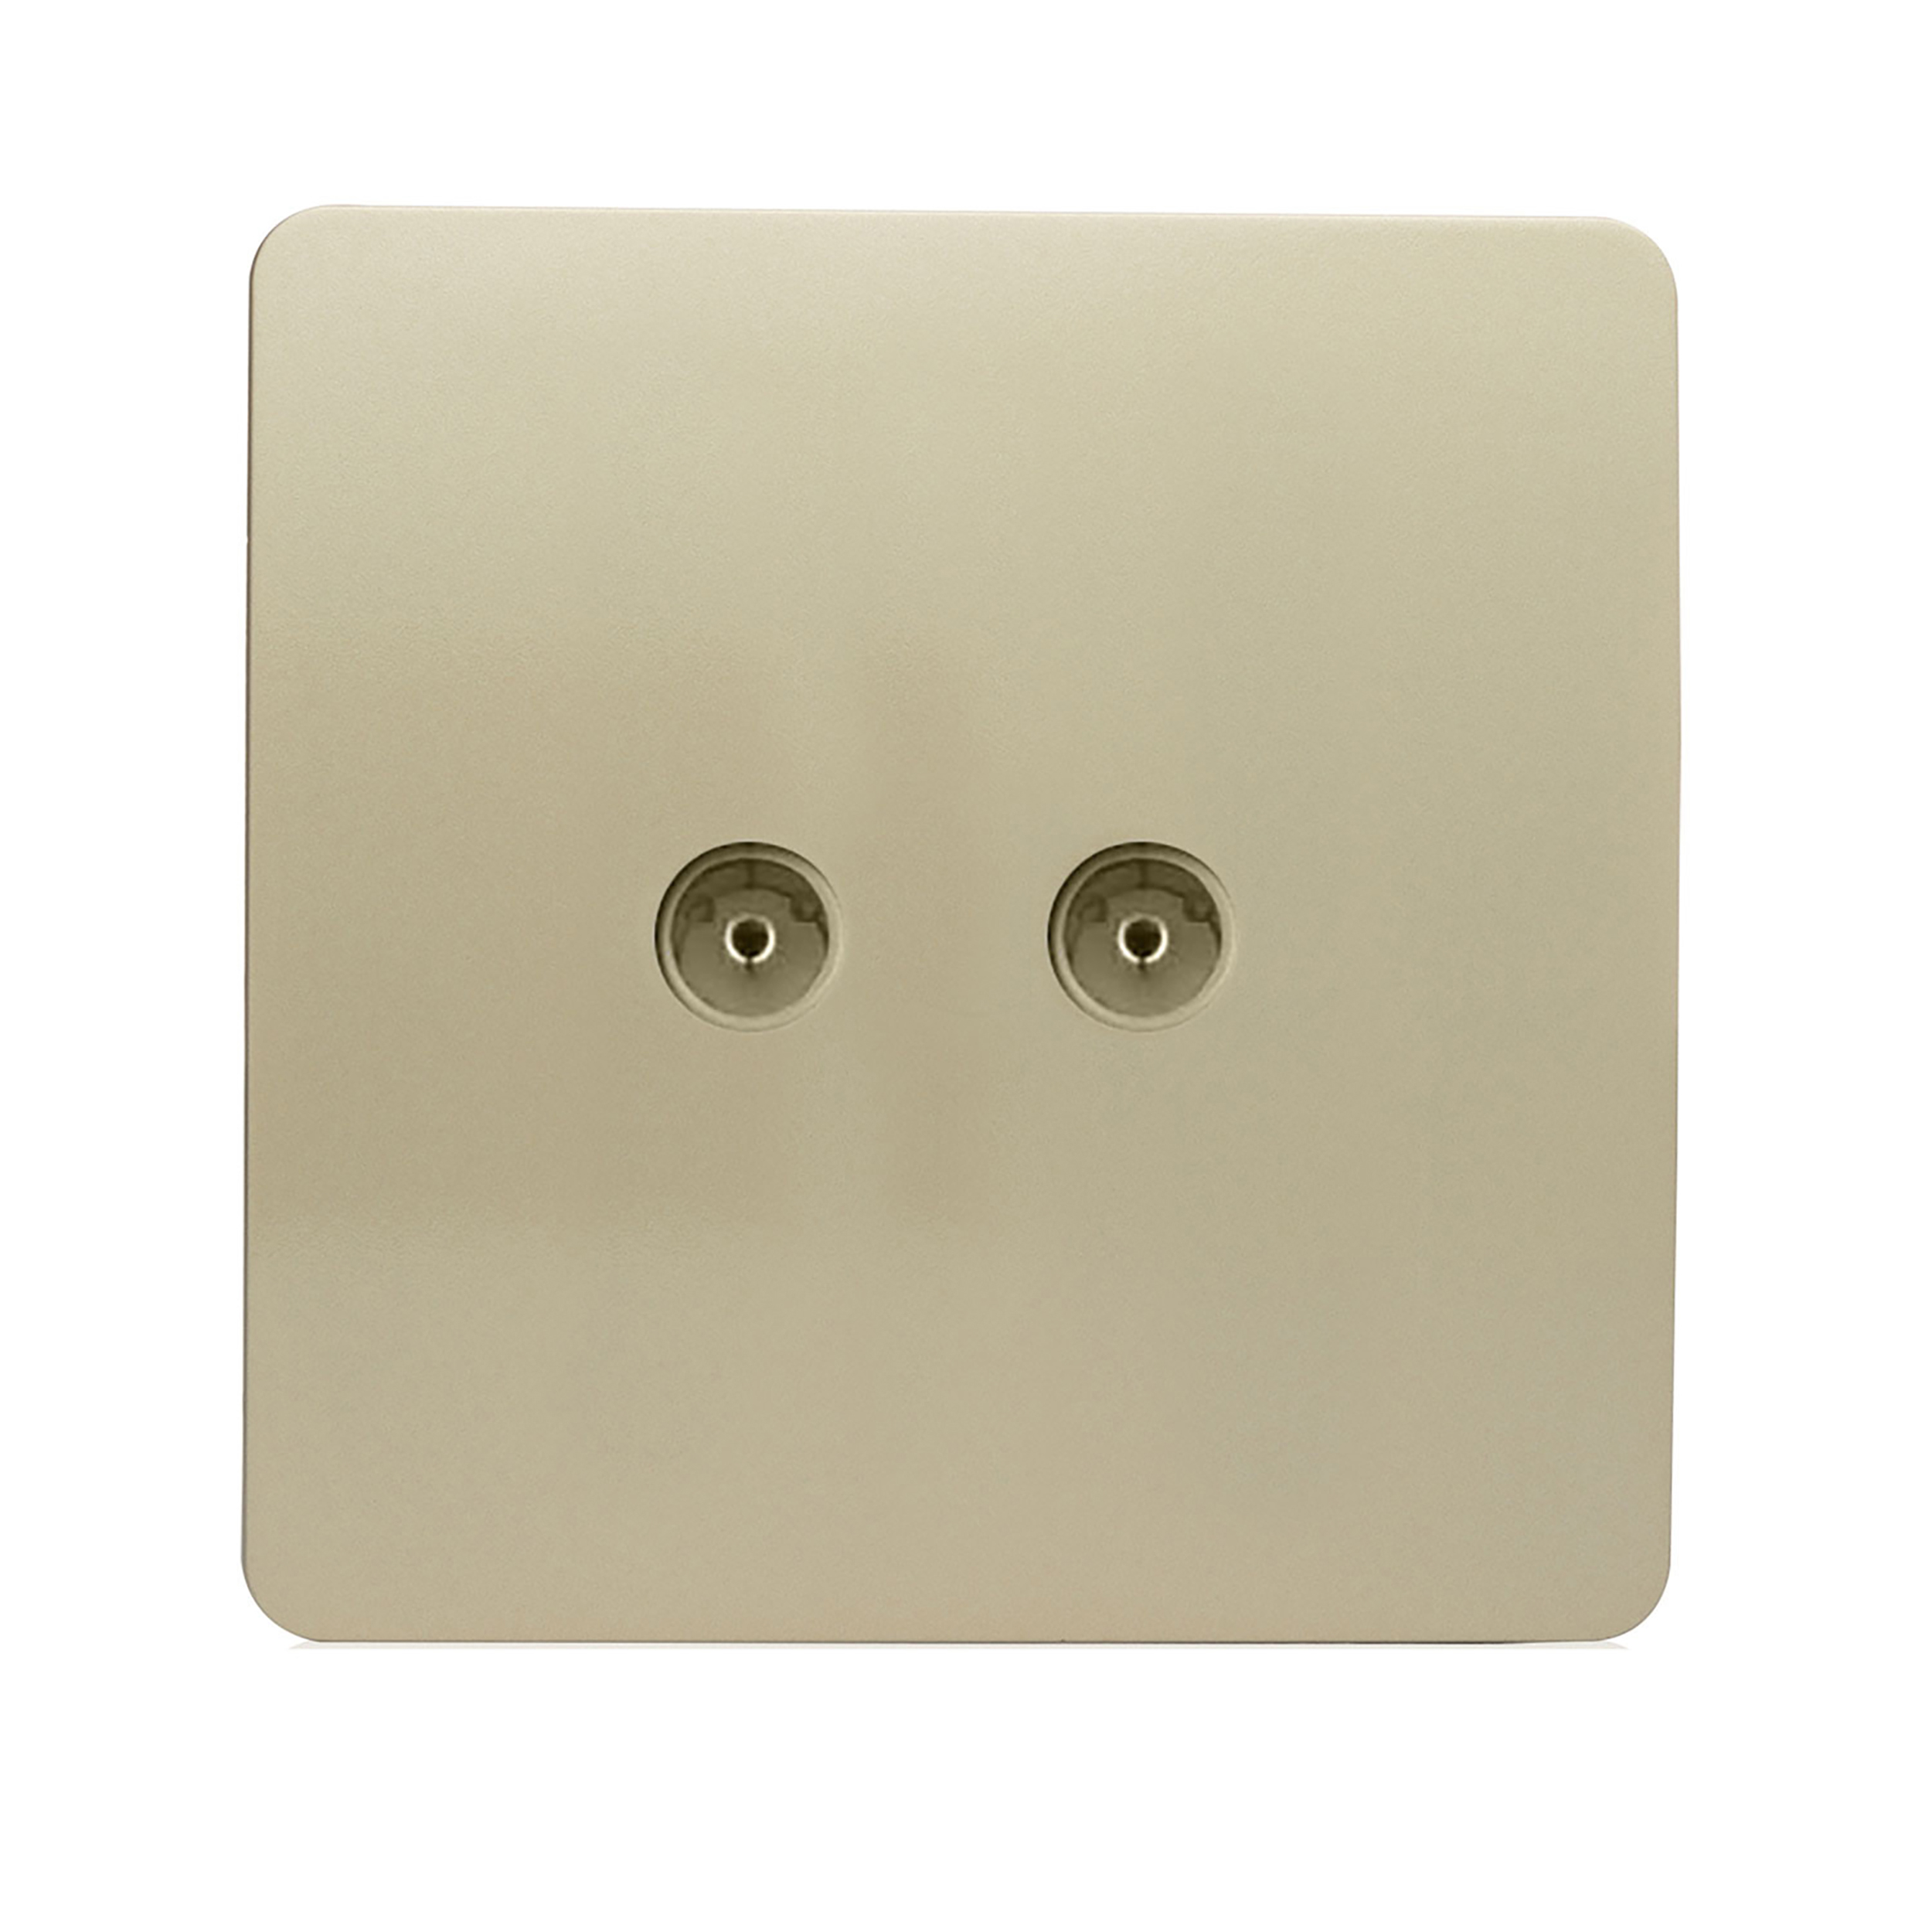 ART-2TVSGO  Twin TV Co-Axial Outlet Champagne Gold